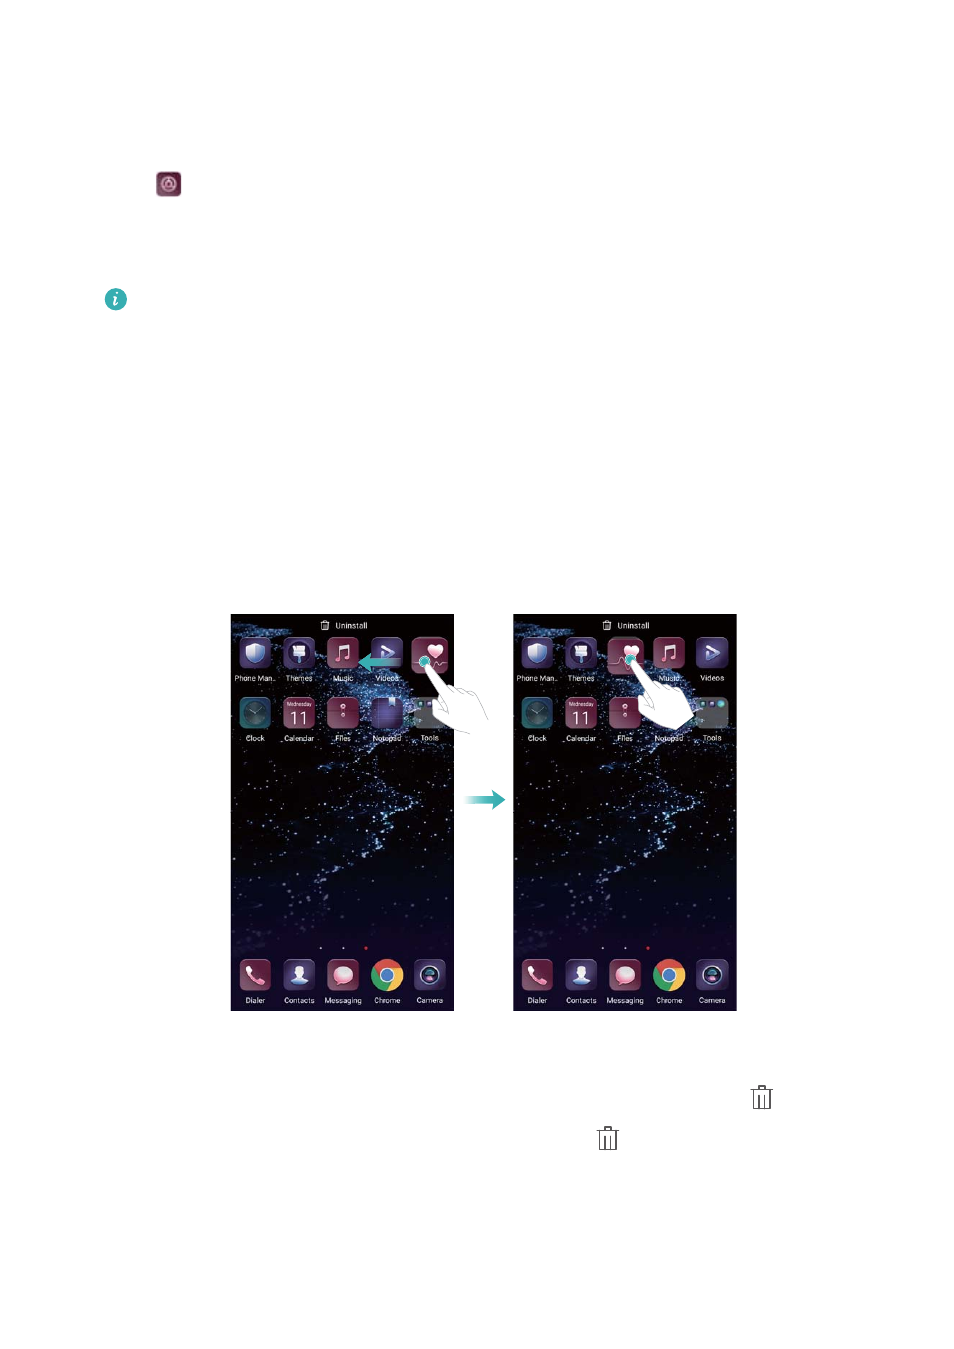 Changing The Wallpaper Automatically Managing Home Screen Icons Moving Home Screen Icons Huawei P10 User Manual Page 21 158